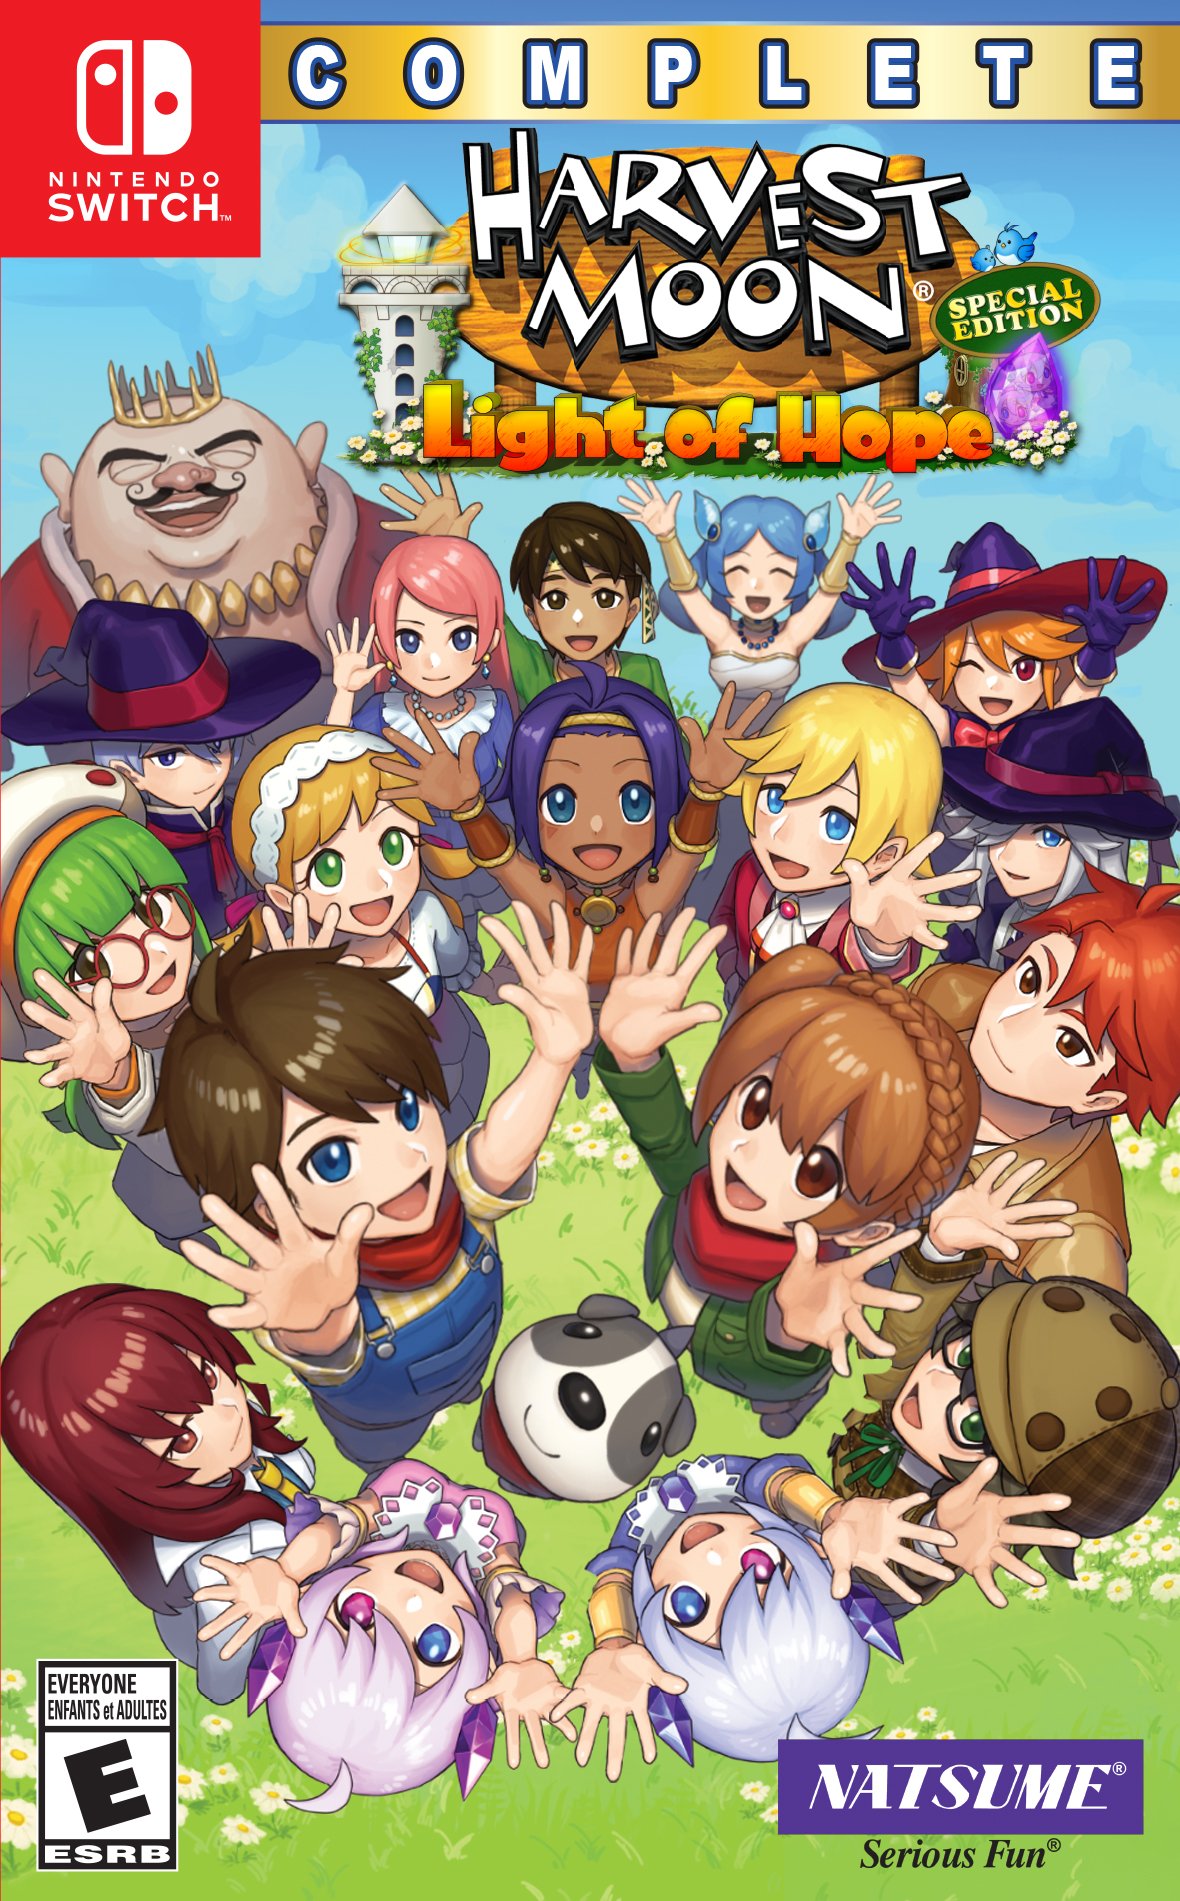 Natsume Inc. on Twitter: "Spread the news! #HarvestMoon: Light of Hope Special Edition COMPLETE (full game + edition + ALL DLC on one disc/cart) arrives July 30! Pre-Orders available now at